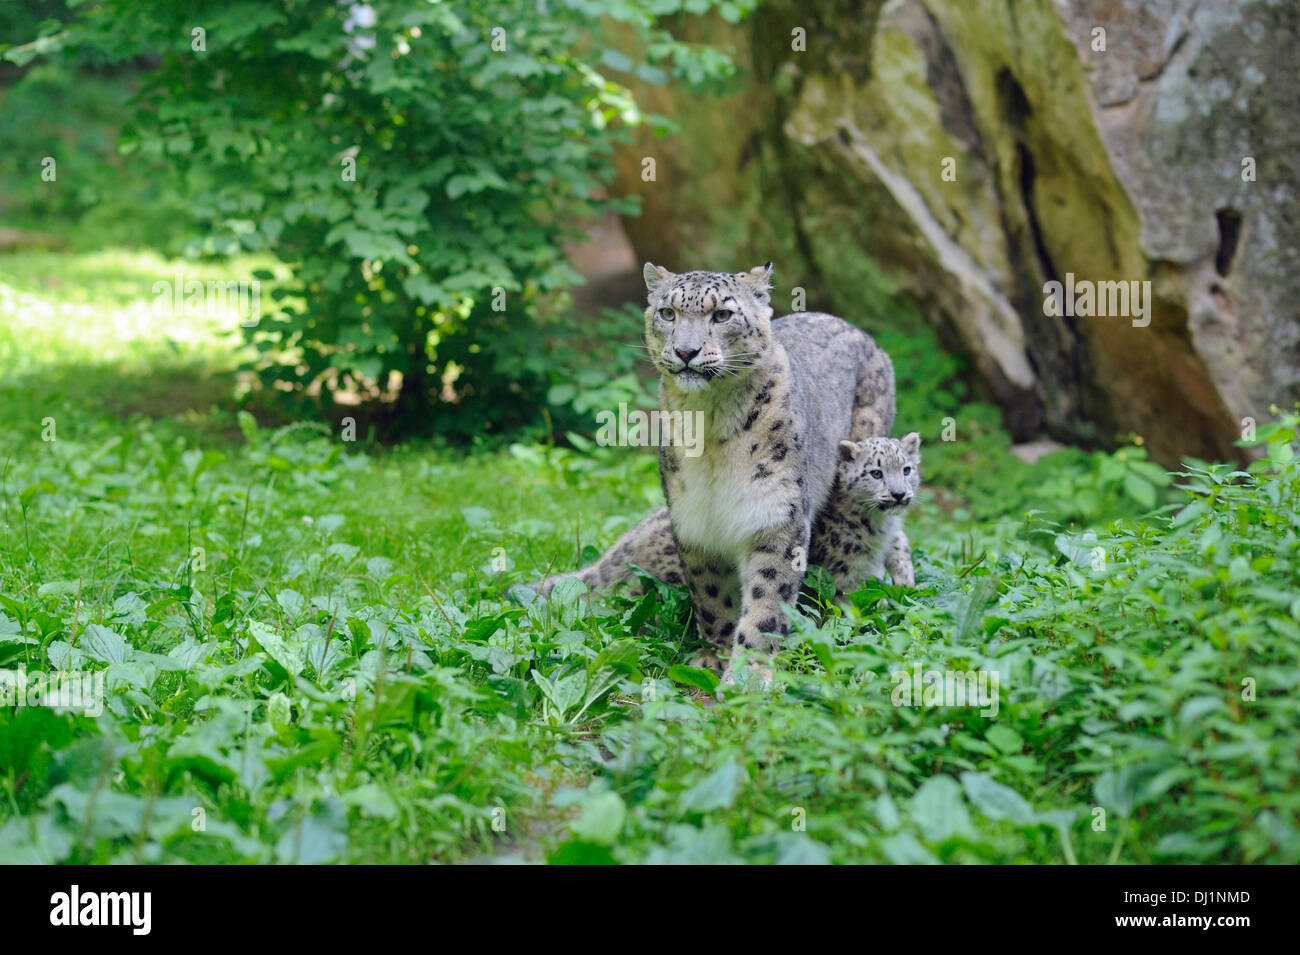 Snow Leopard Panthera unica Cub with mother zoo Stock Photo